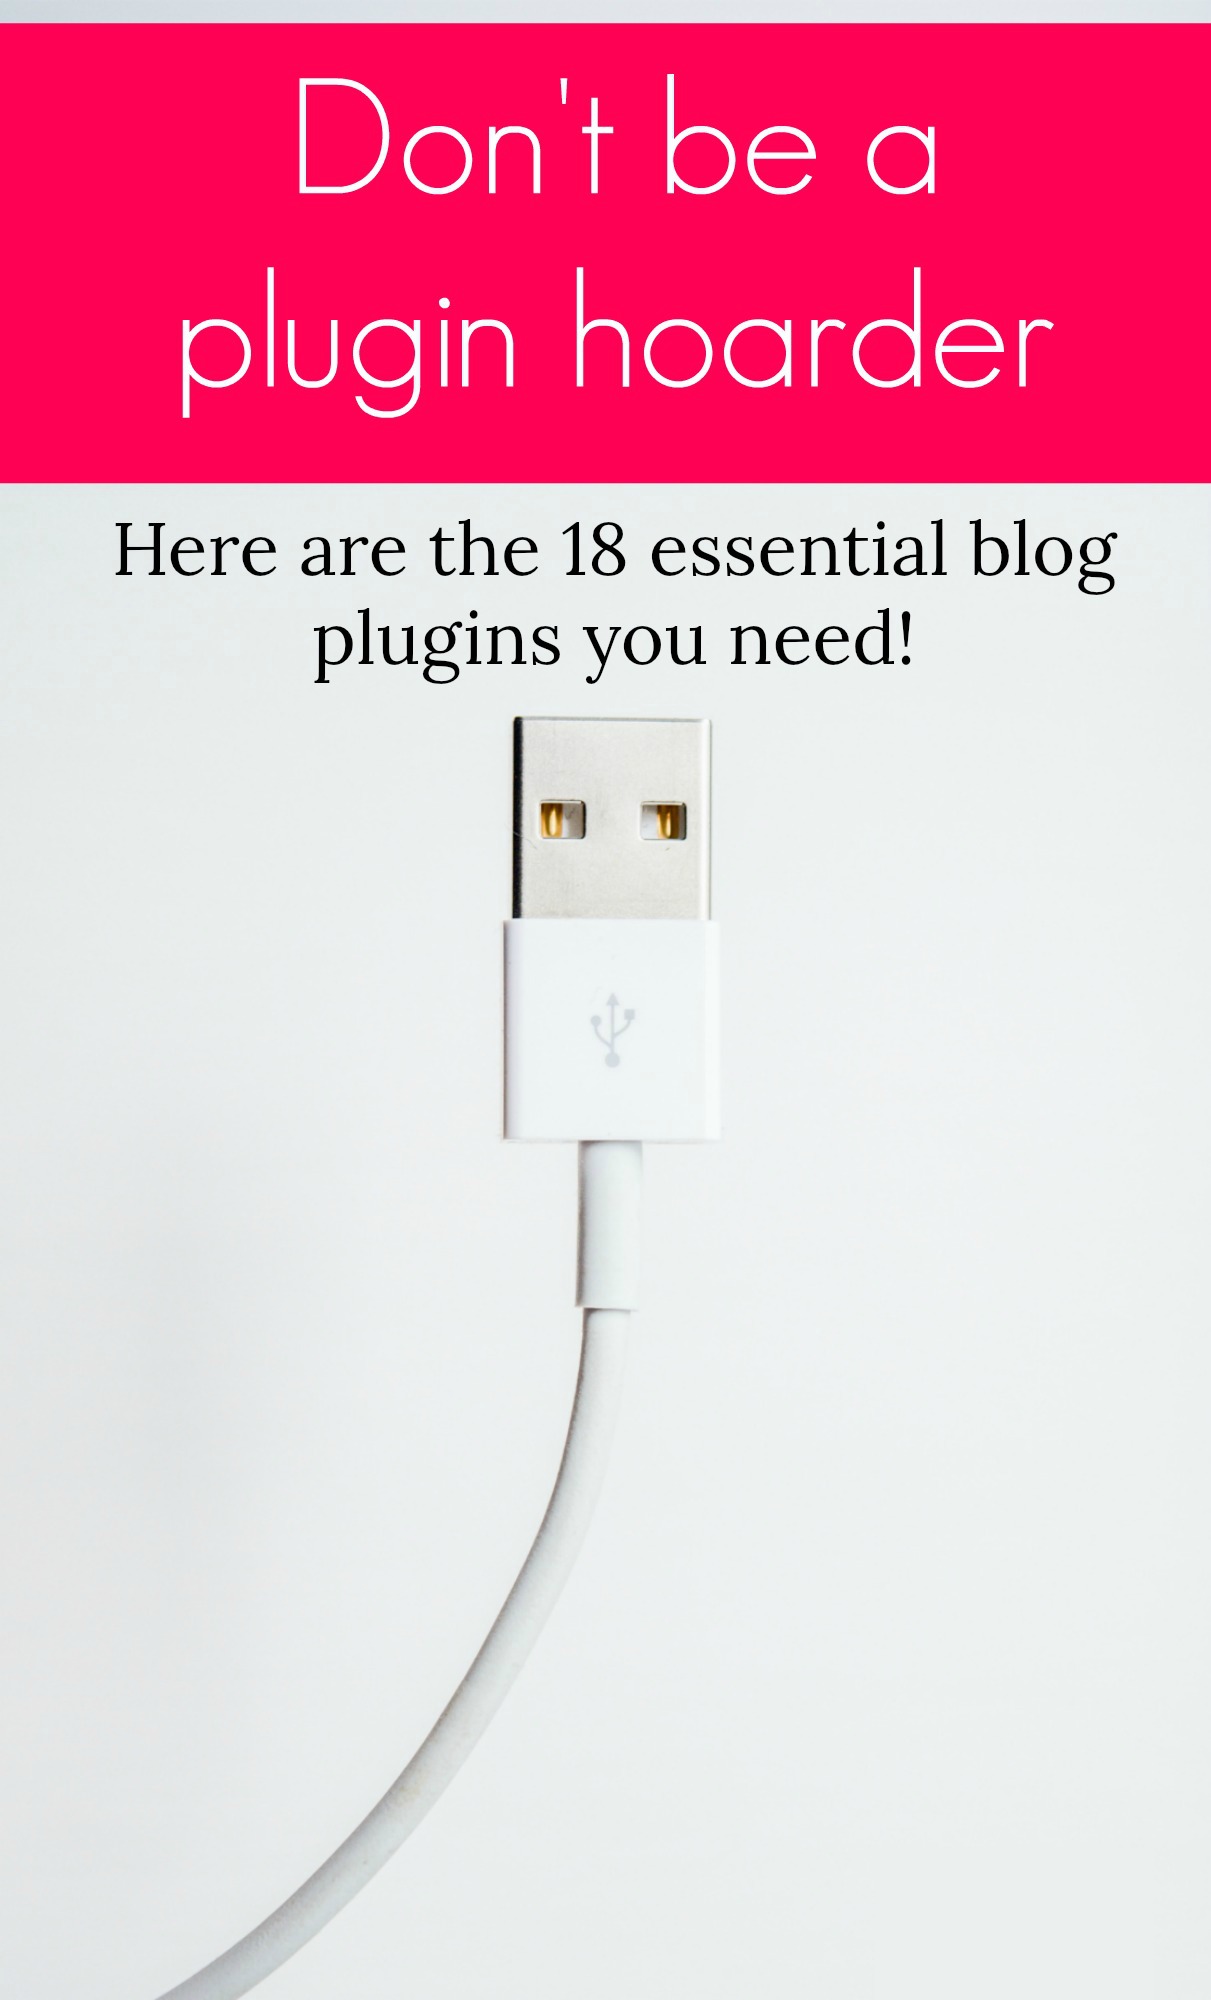 The Best Wordpress Blog Plugins: 15 Must Have Plugins. The 15 most essential plugins for your Wordpress blog. Beginner's guide to starting a blog.